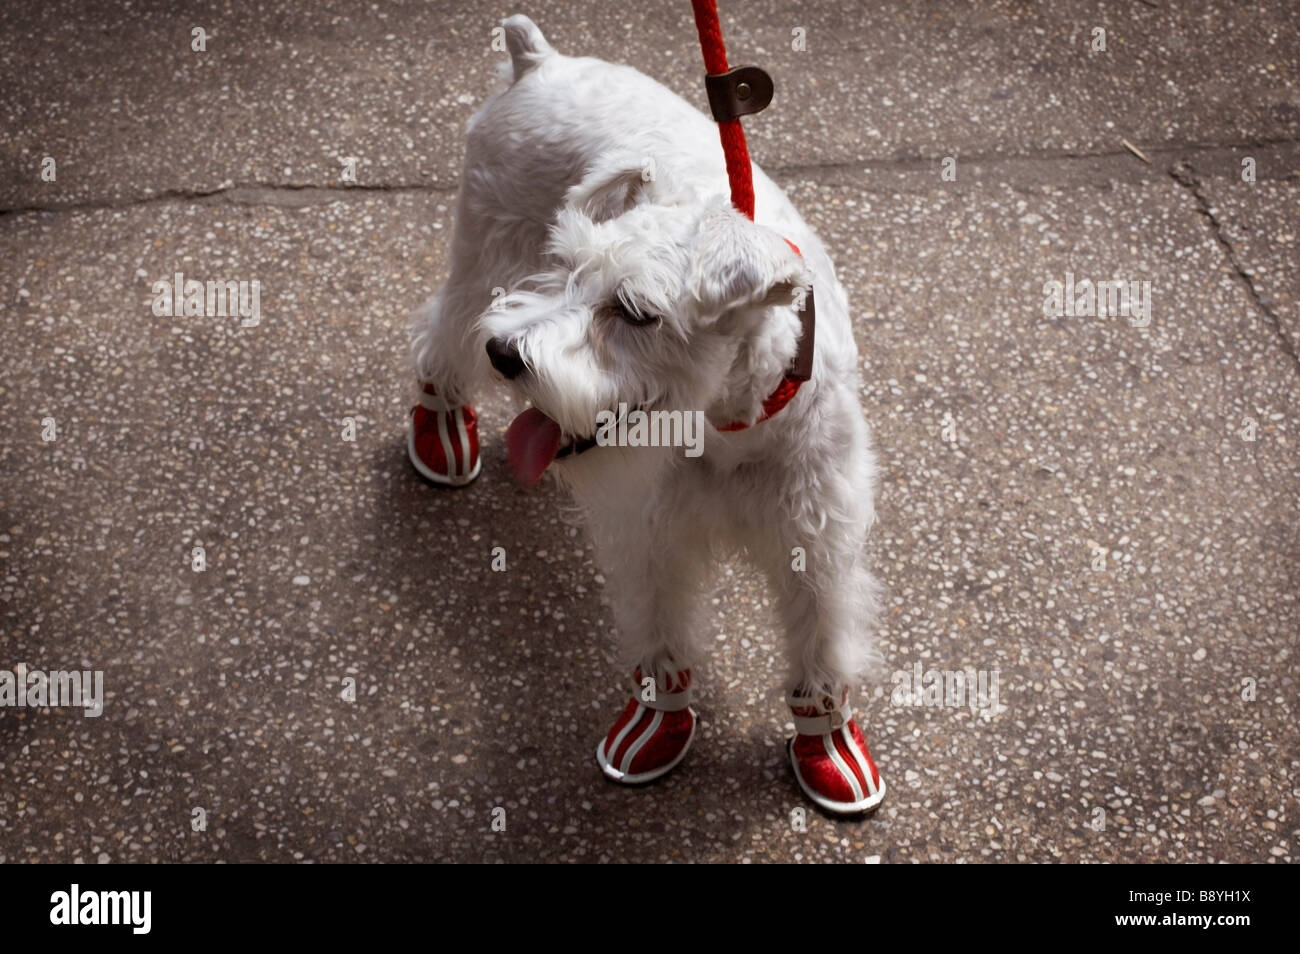 A dog wearing shoes New York City USA. Stock Photo